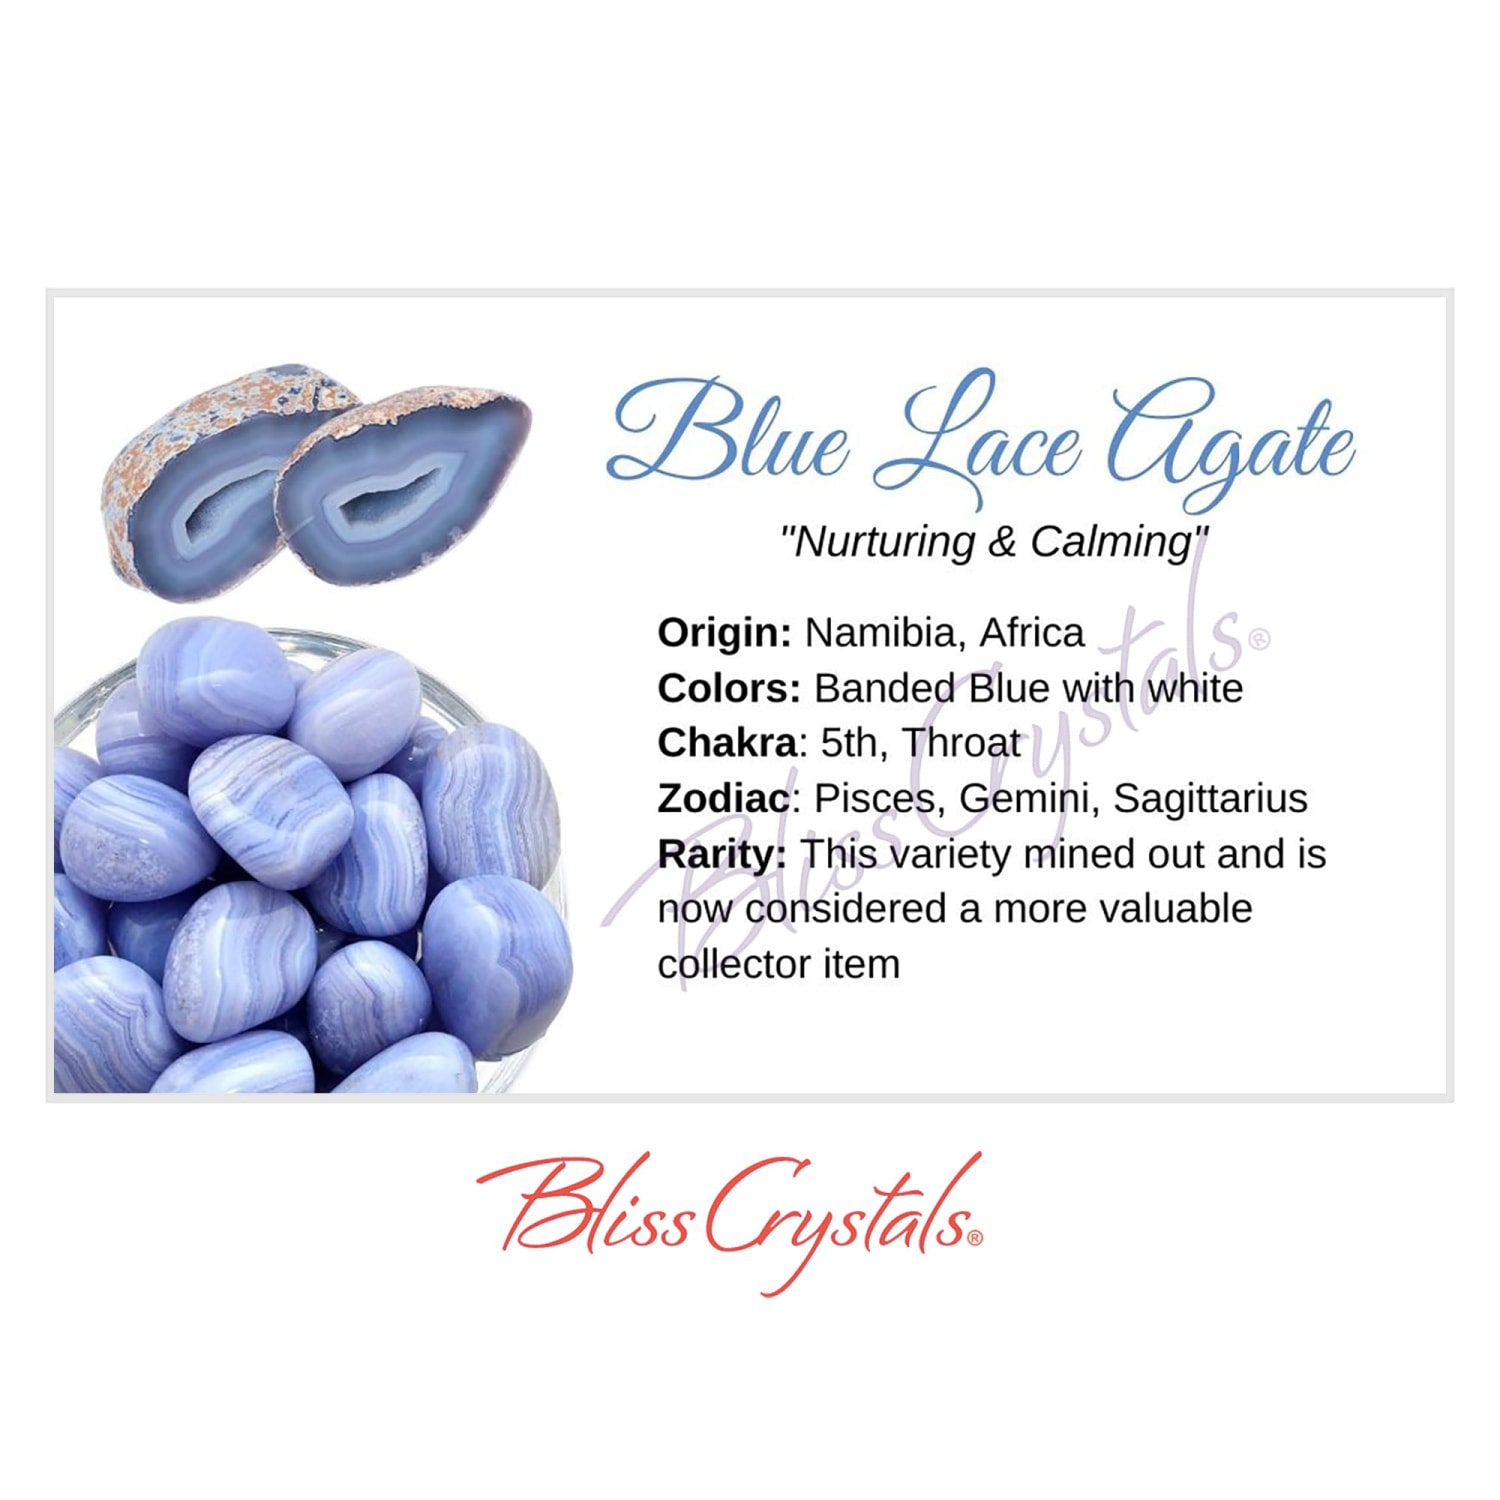 BLUE LACE AGATE Crystal Information Card, Double sided #HC16